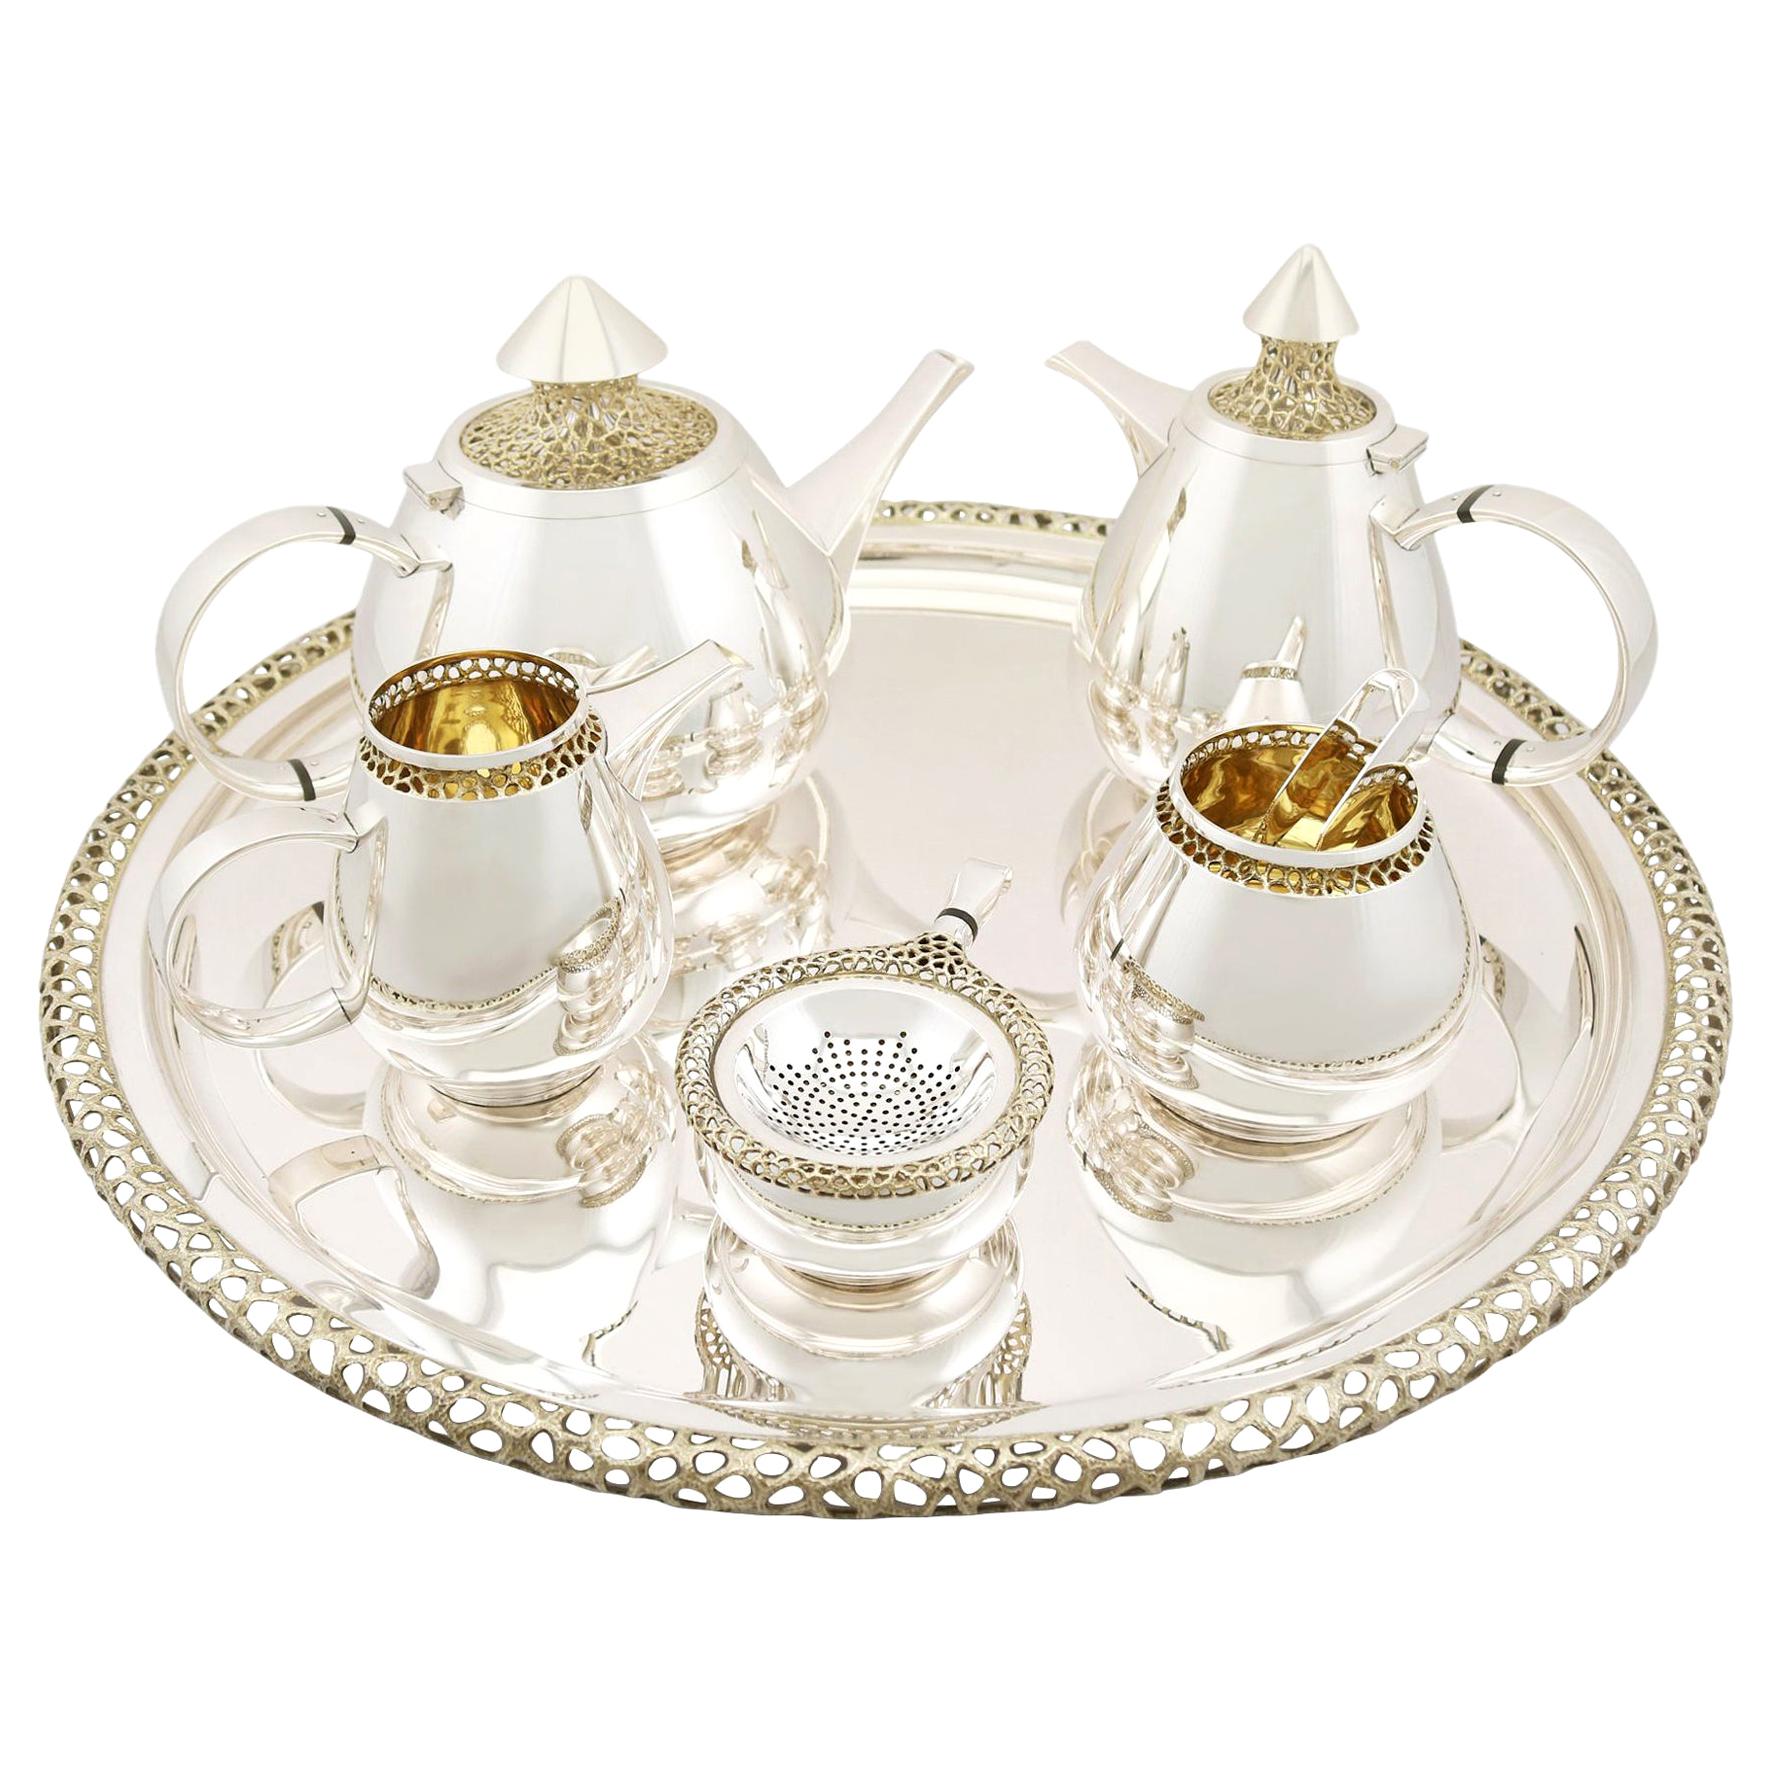 Unusual Vintage English Sterling Silver Six-Piece Tea and Coffee Service